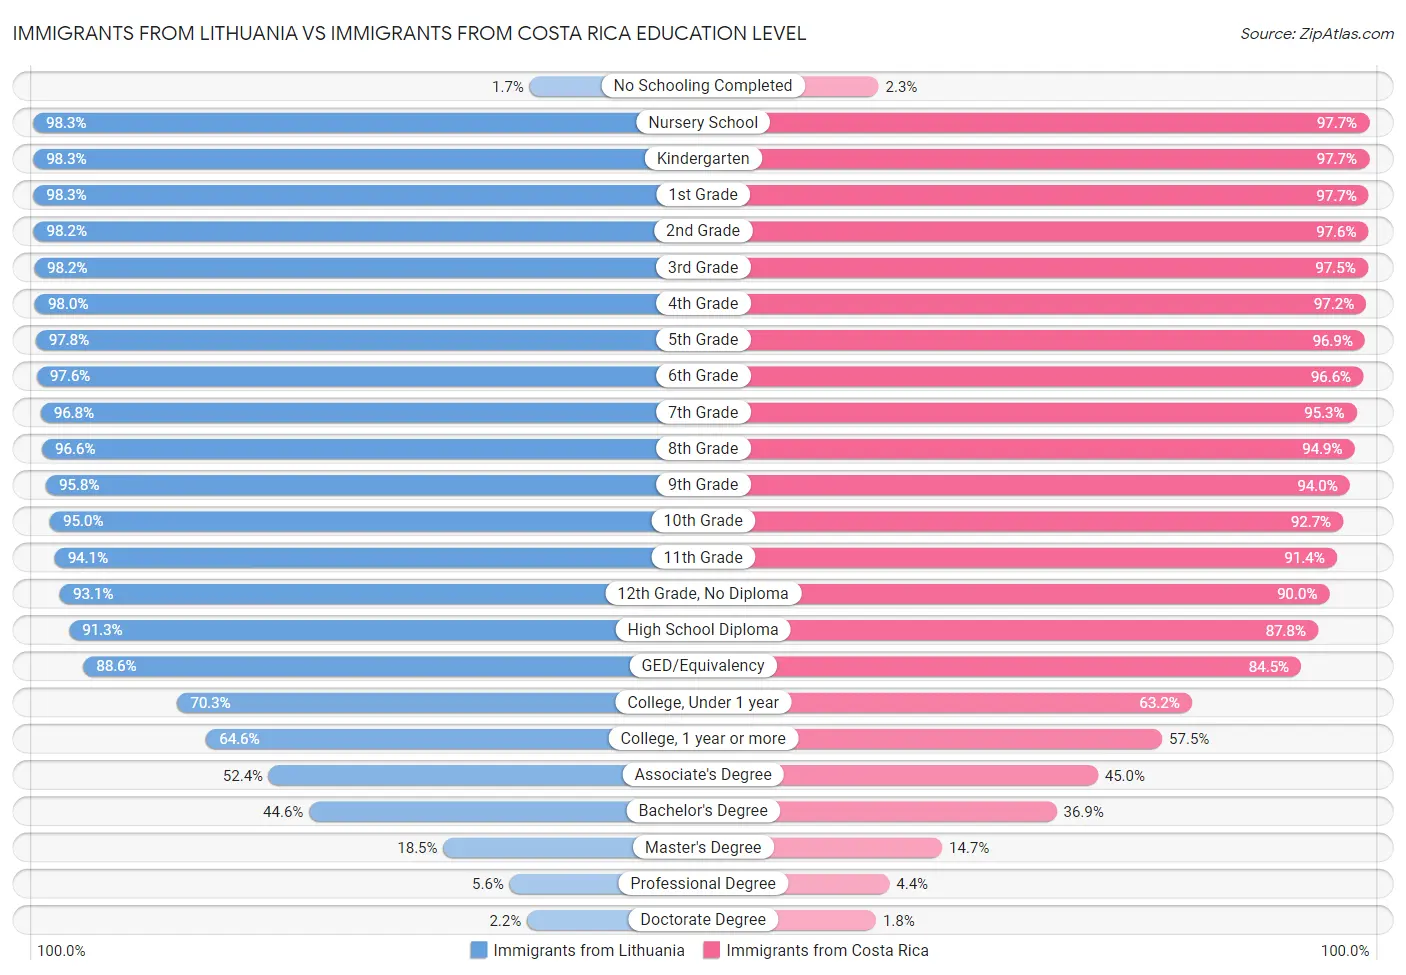 Immigrants from Lithuania vs Immigrants from Costa Rica Education Level